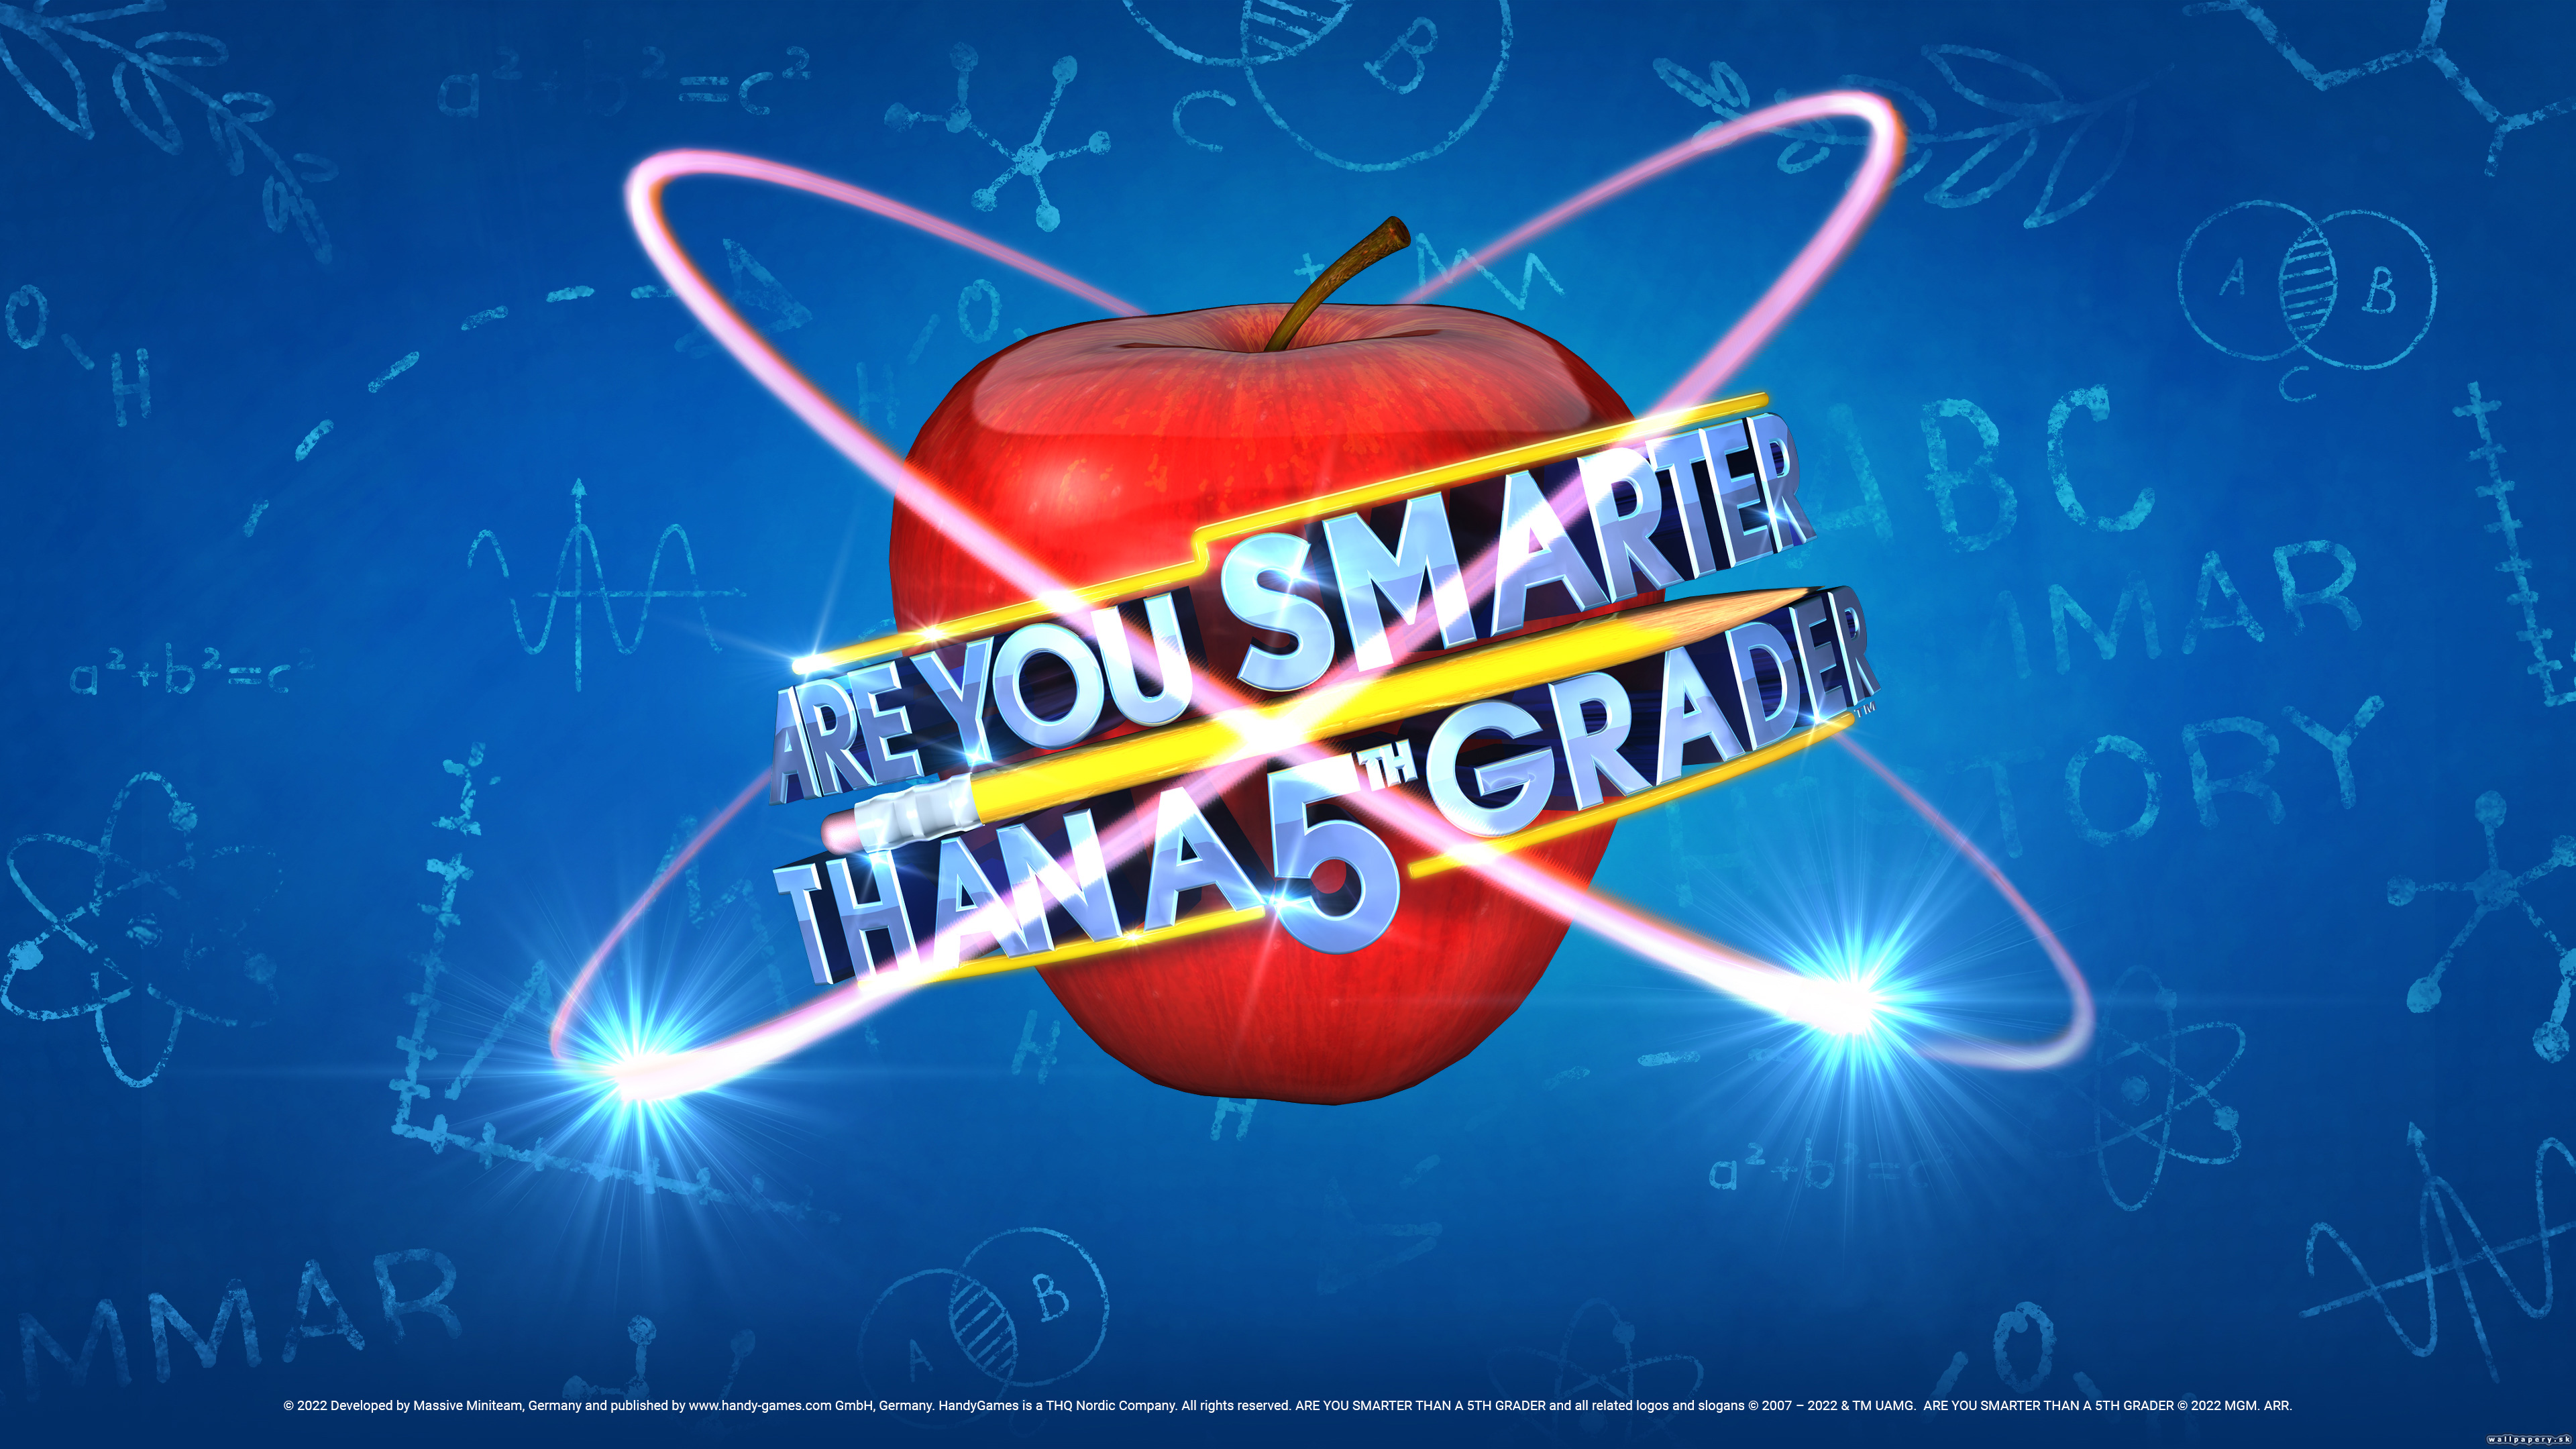 Are You Smarter Than A 5th Grader? - wallpaper 2